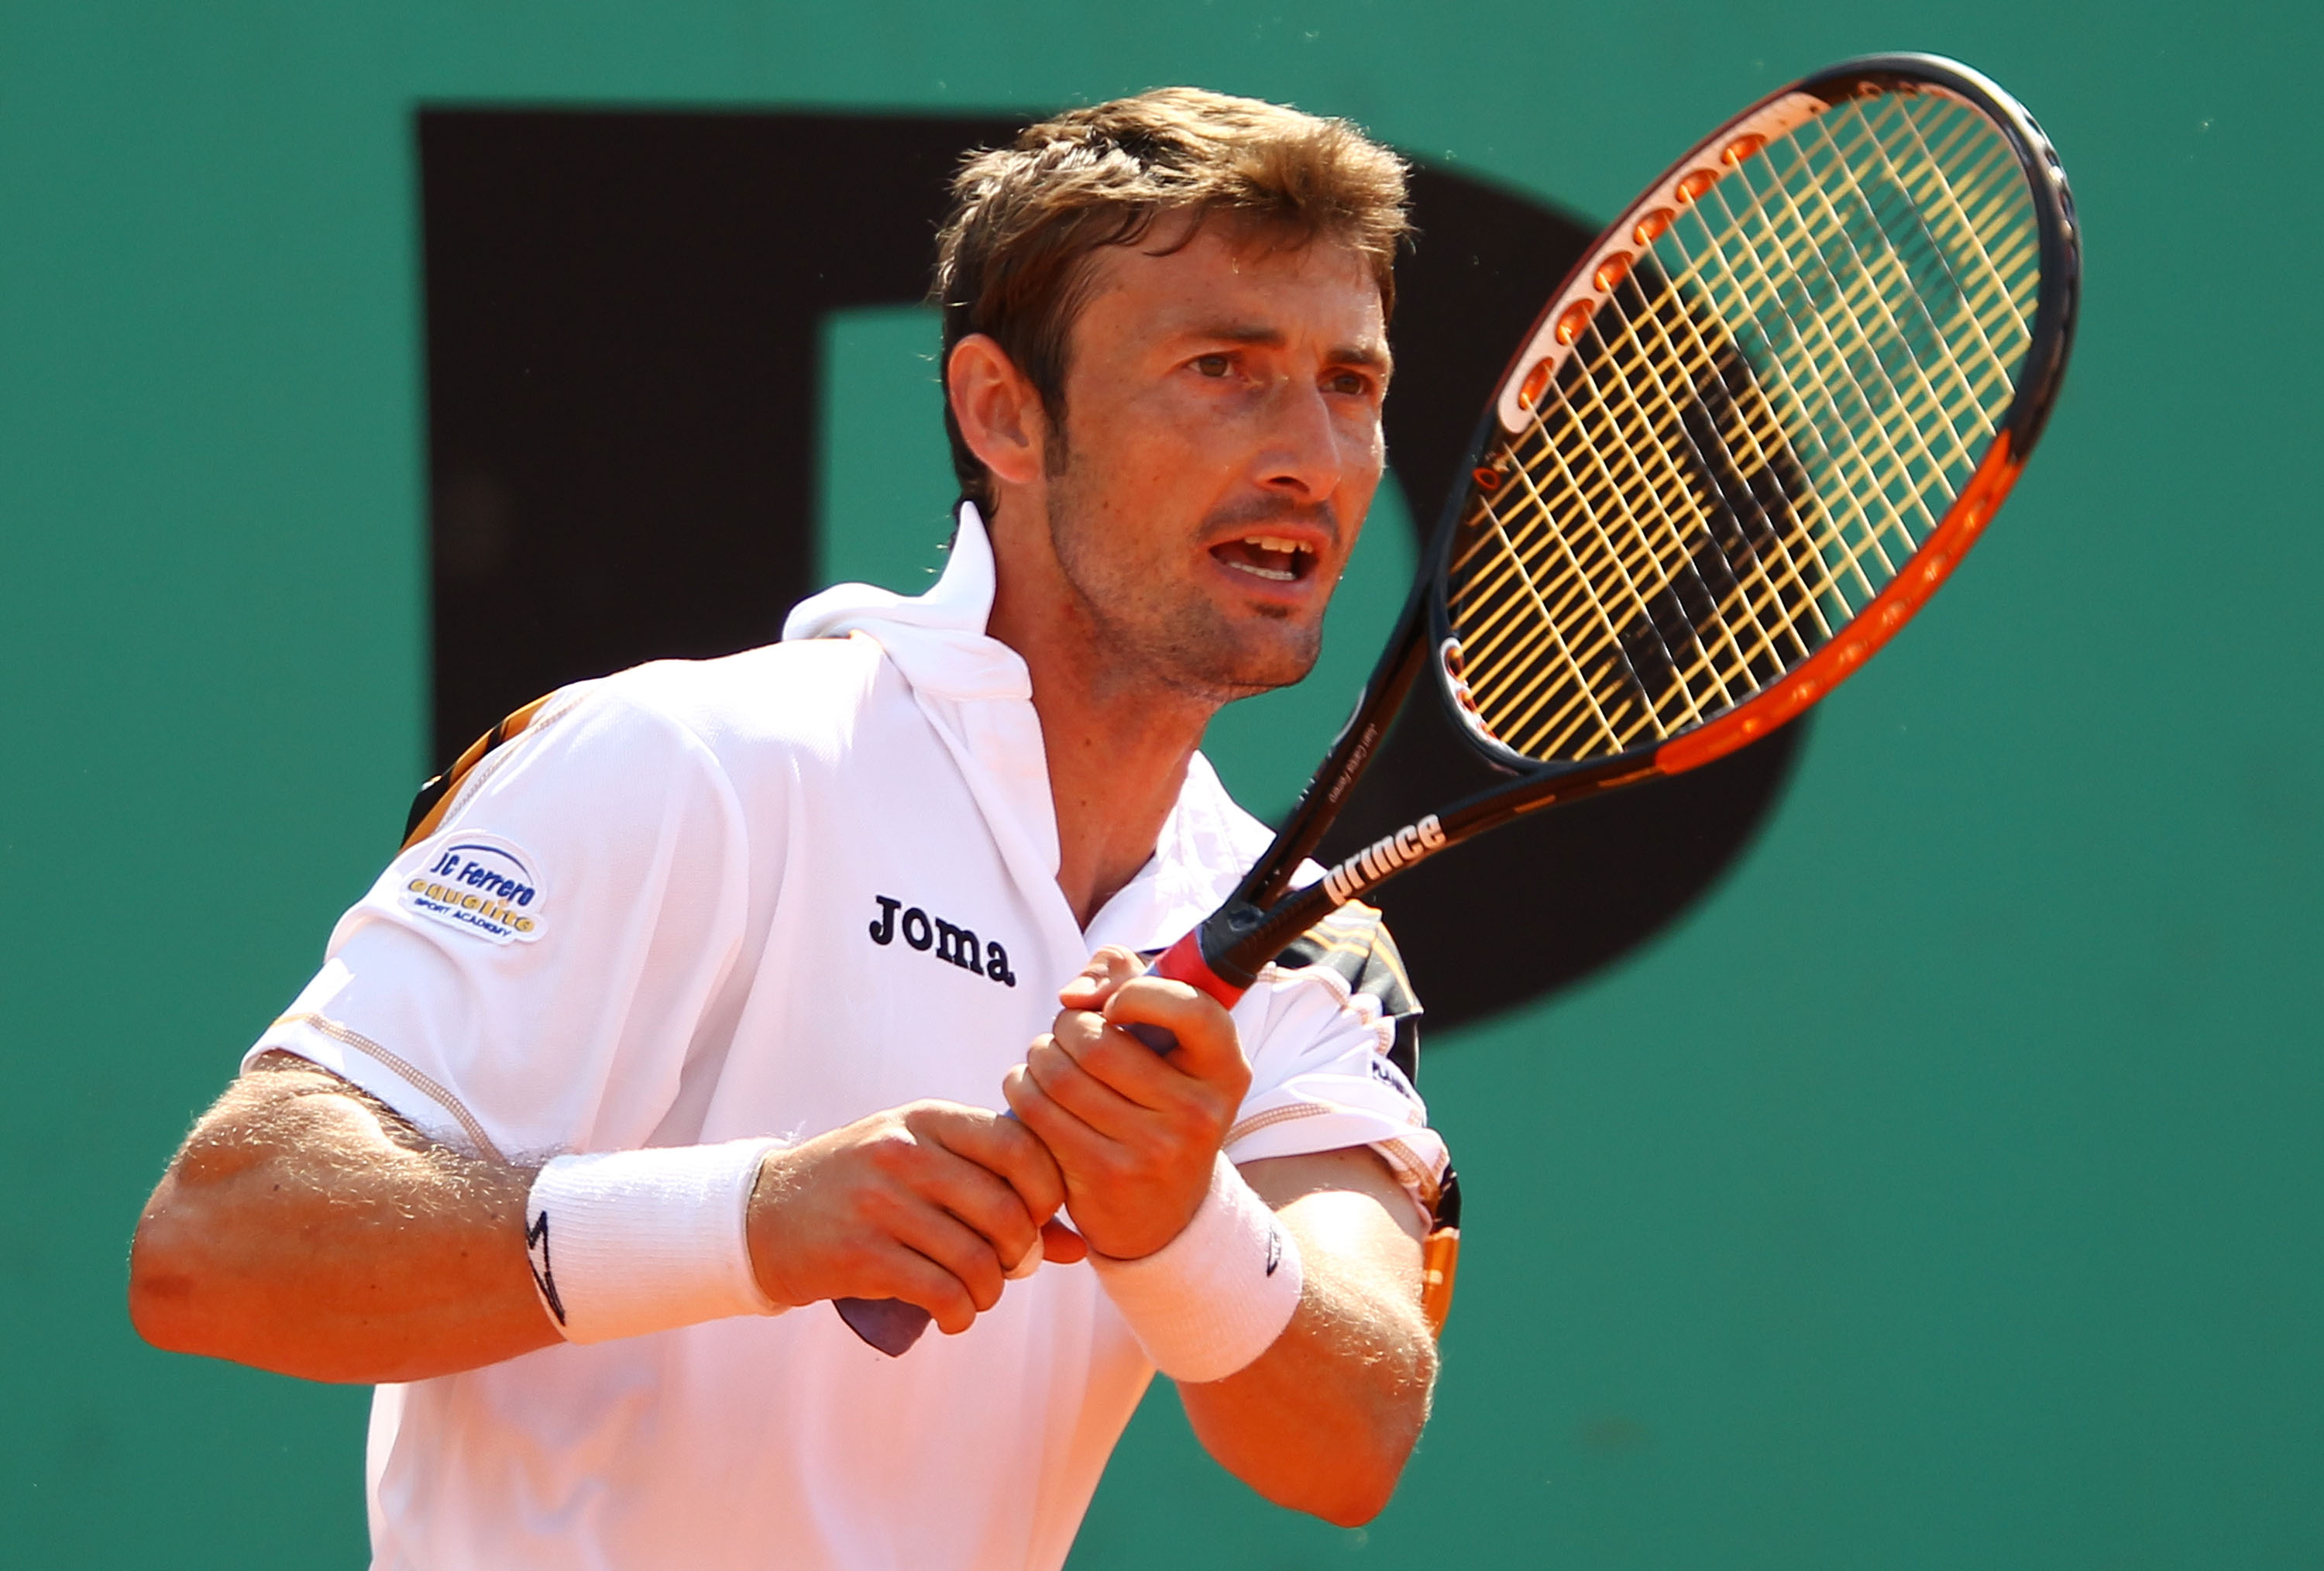 PARIS - MAY 28:  Juan Carlos Ferrero of Spain plays a backhand during the men's singles second round match between Juan Carlos Ferrero of Spain and Pere Riba of Spain on day six of the French Open at Roland Garros on May 28, 2010 in Paris, France.  (Photo